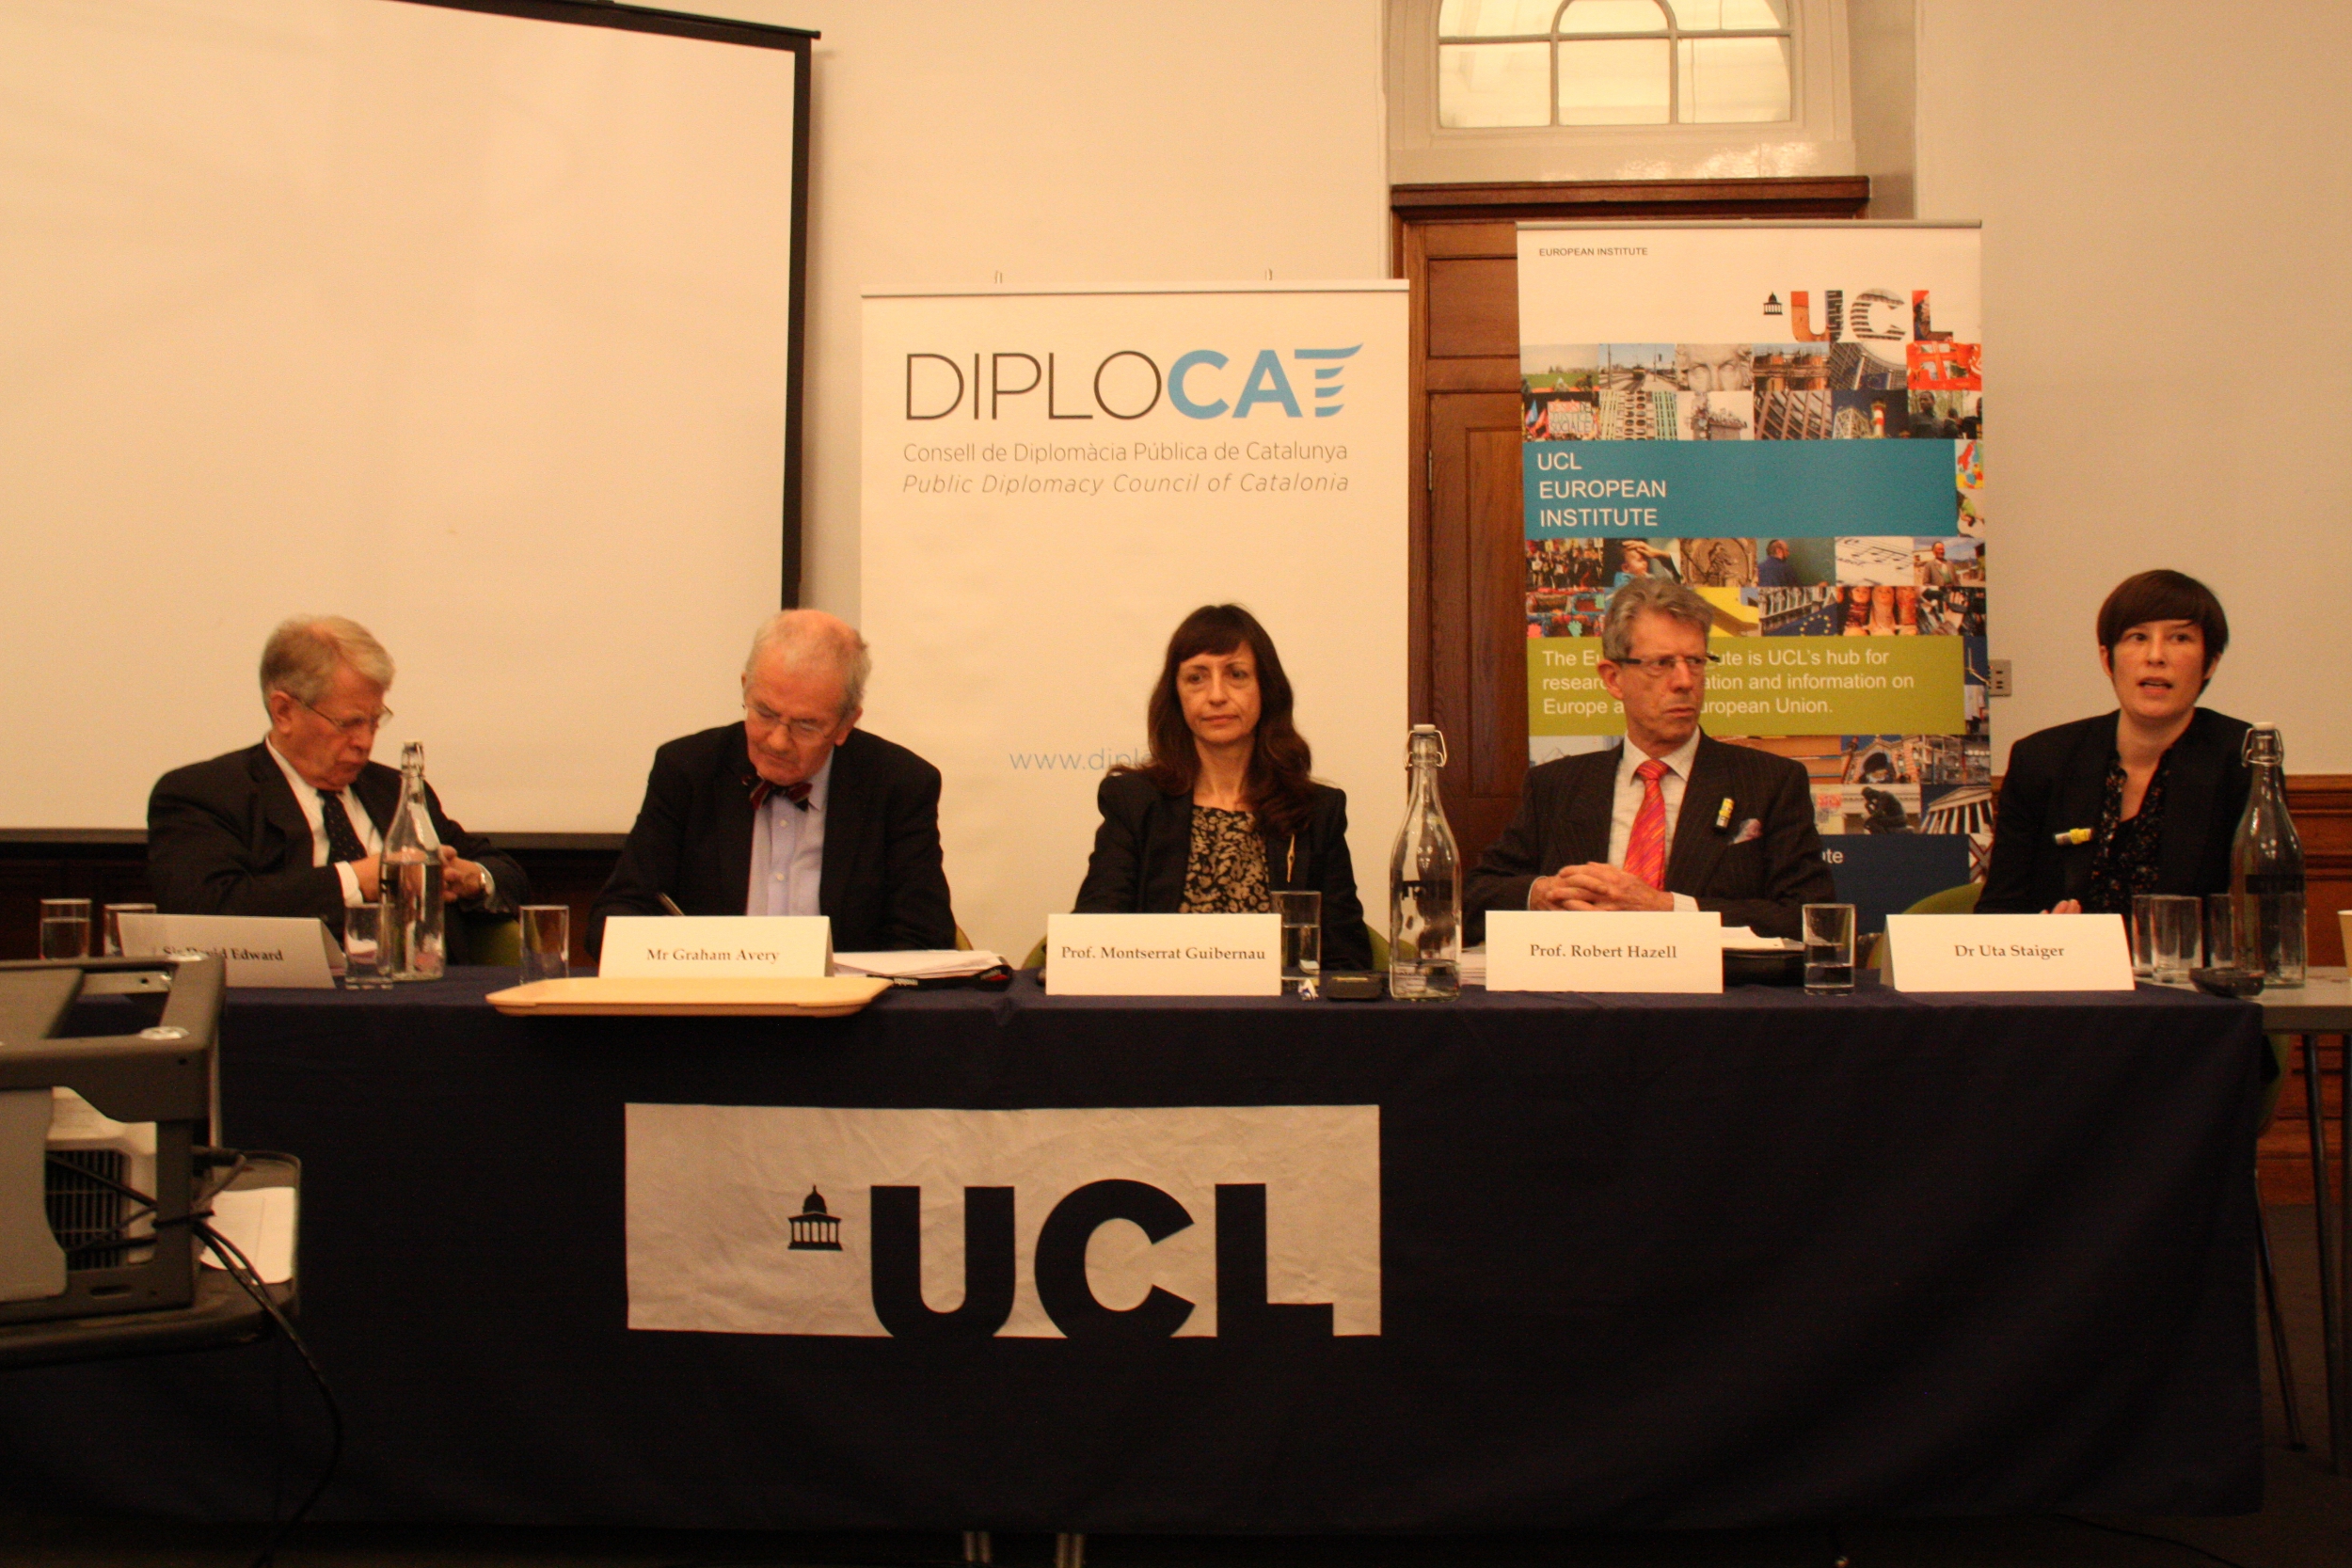 The conference at the UCL. From left to righ: Sir David Edward, Graham Avery, Montserrat Guibernau, Robert Hazell and Uta Staiger (by ACN)